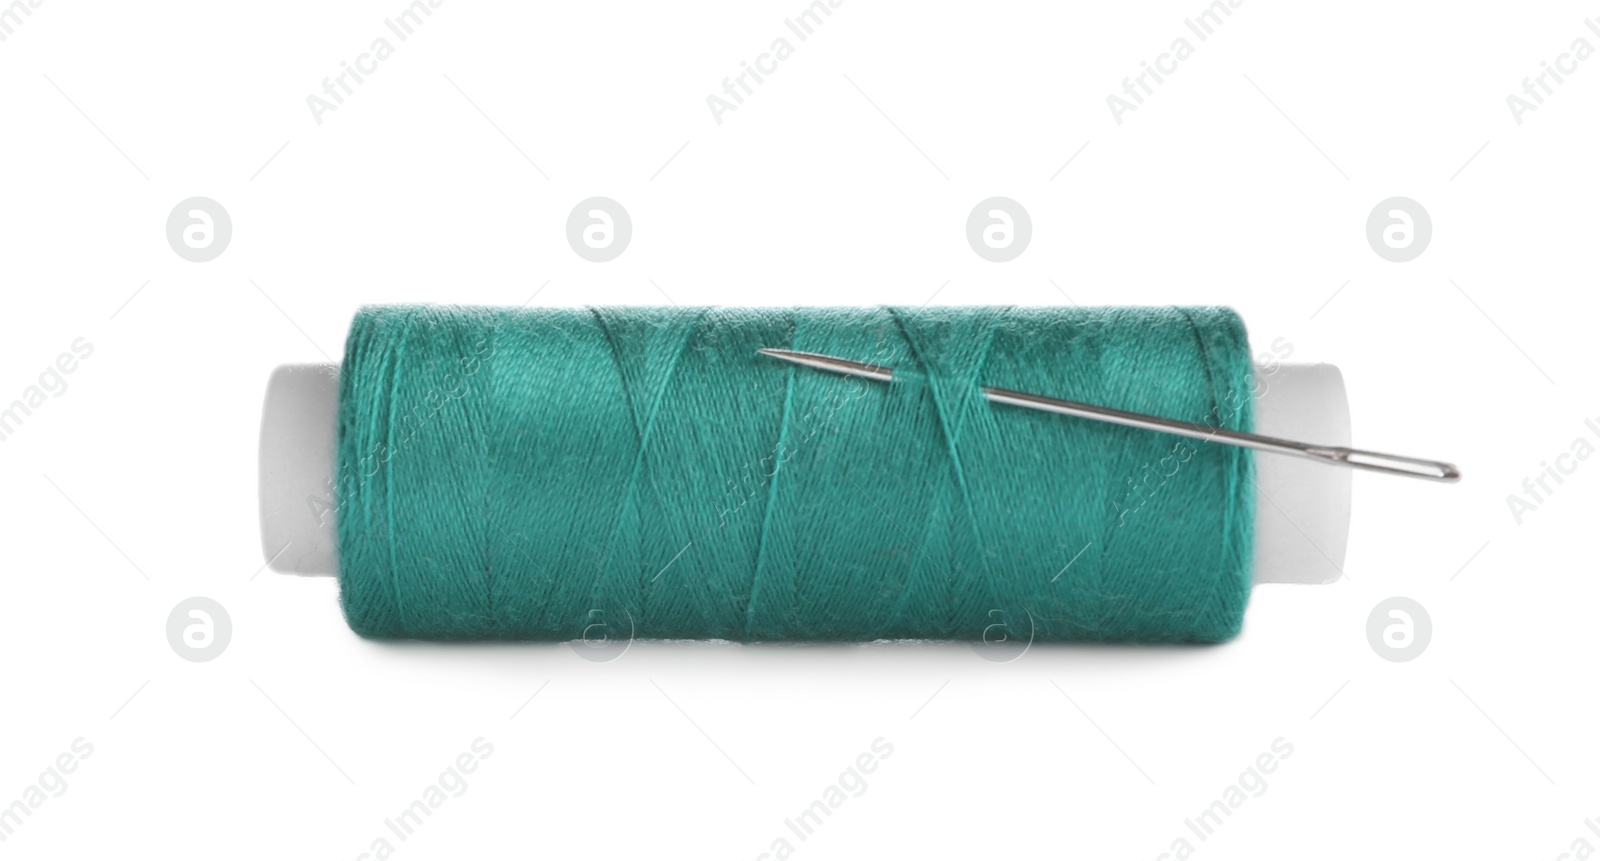 Photo of Bright sewing thread with needle isolated on white